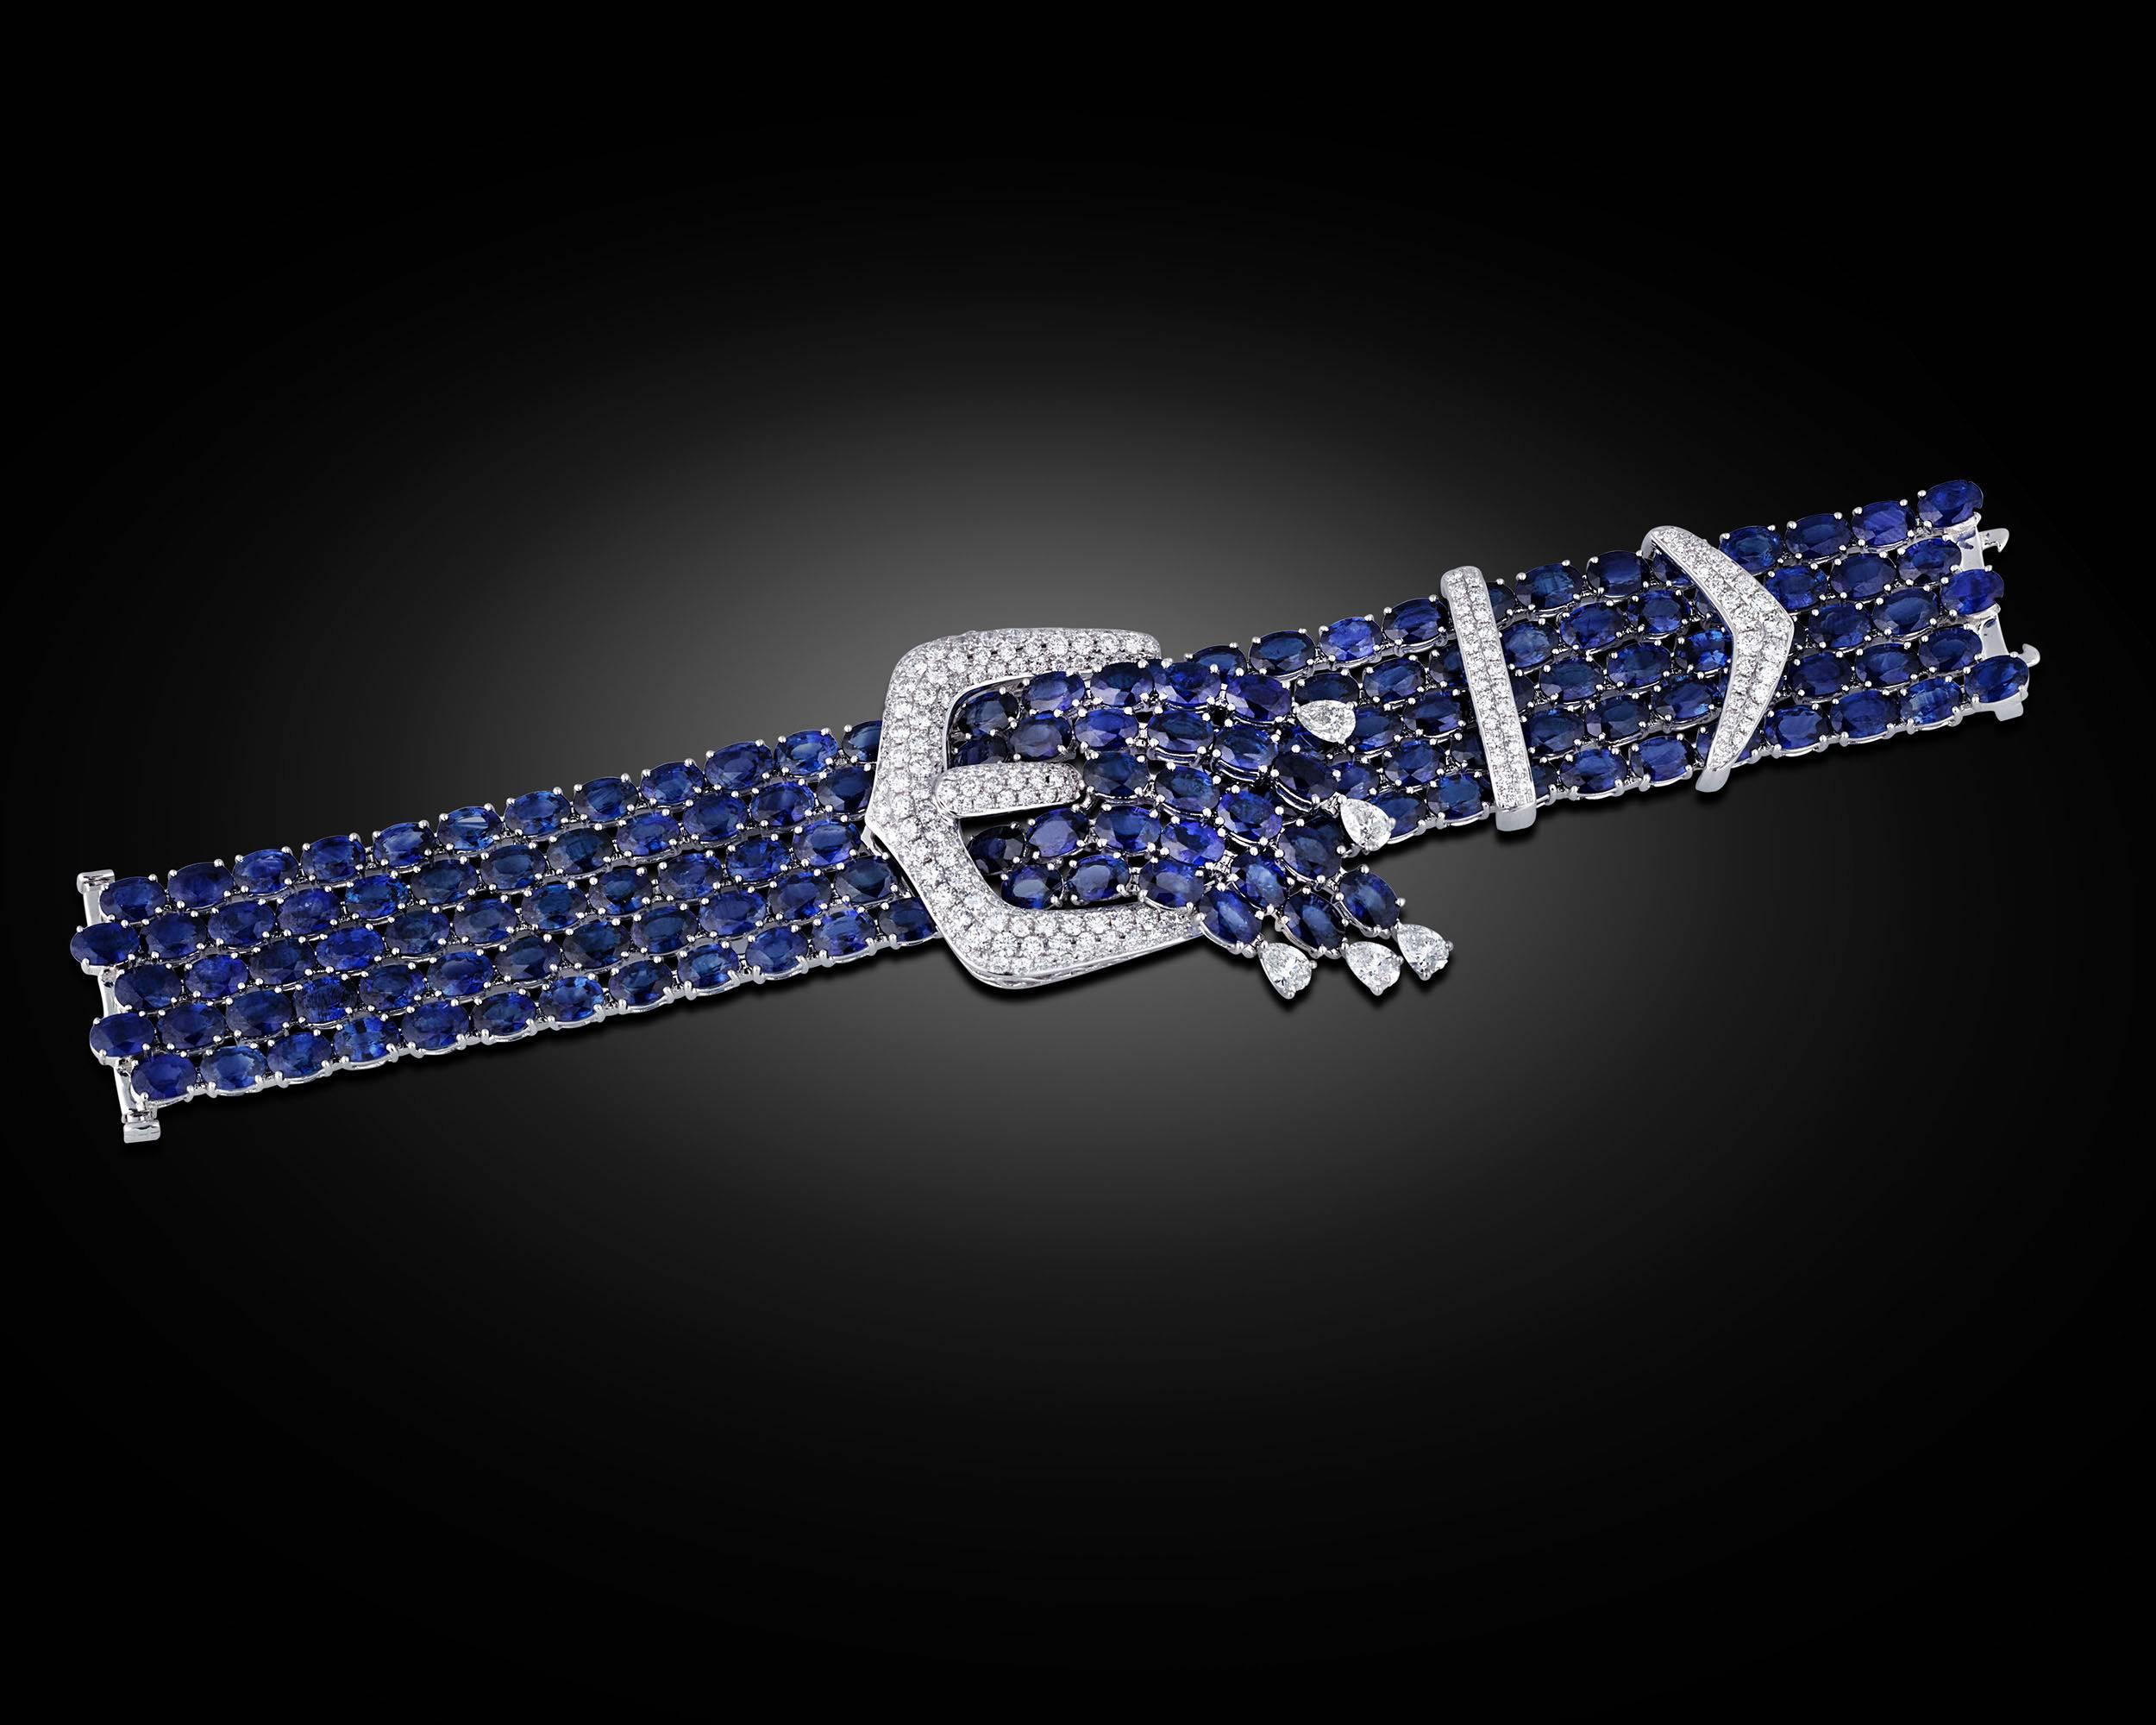 Bold and sophisticated, this extraordinary bracelet features five dazzling rows of cabochon sapphires in a creative, yet elegant design. Totaling 86.92 carats, the enchanting jewels are joined by sparkling diamond buckle accents to create a uniquely